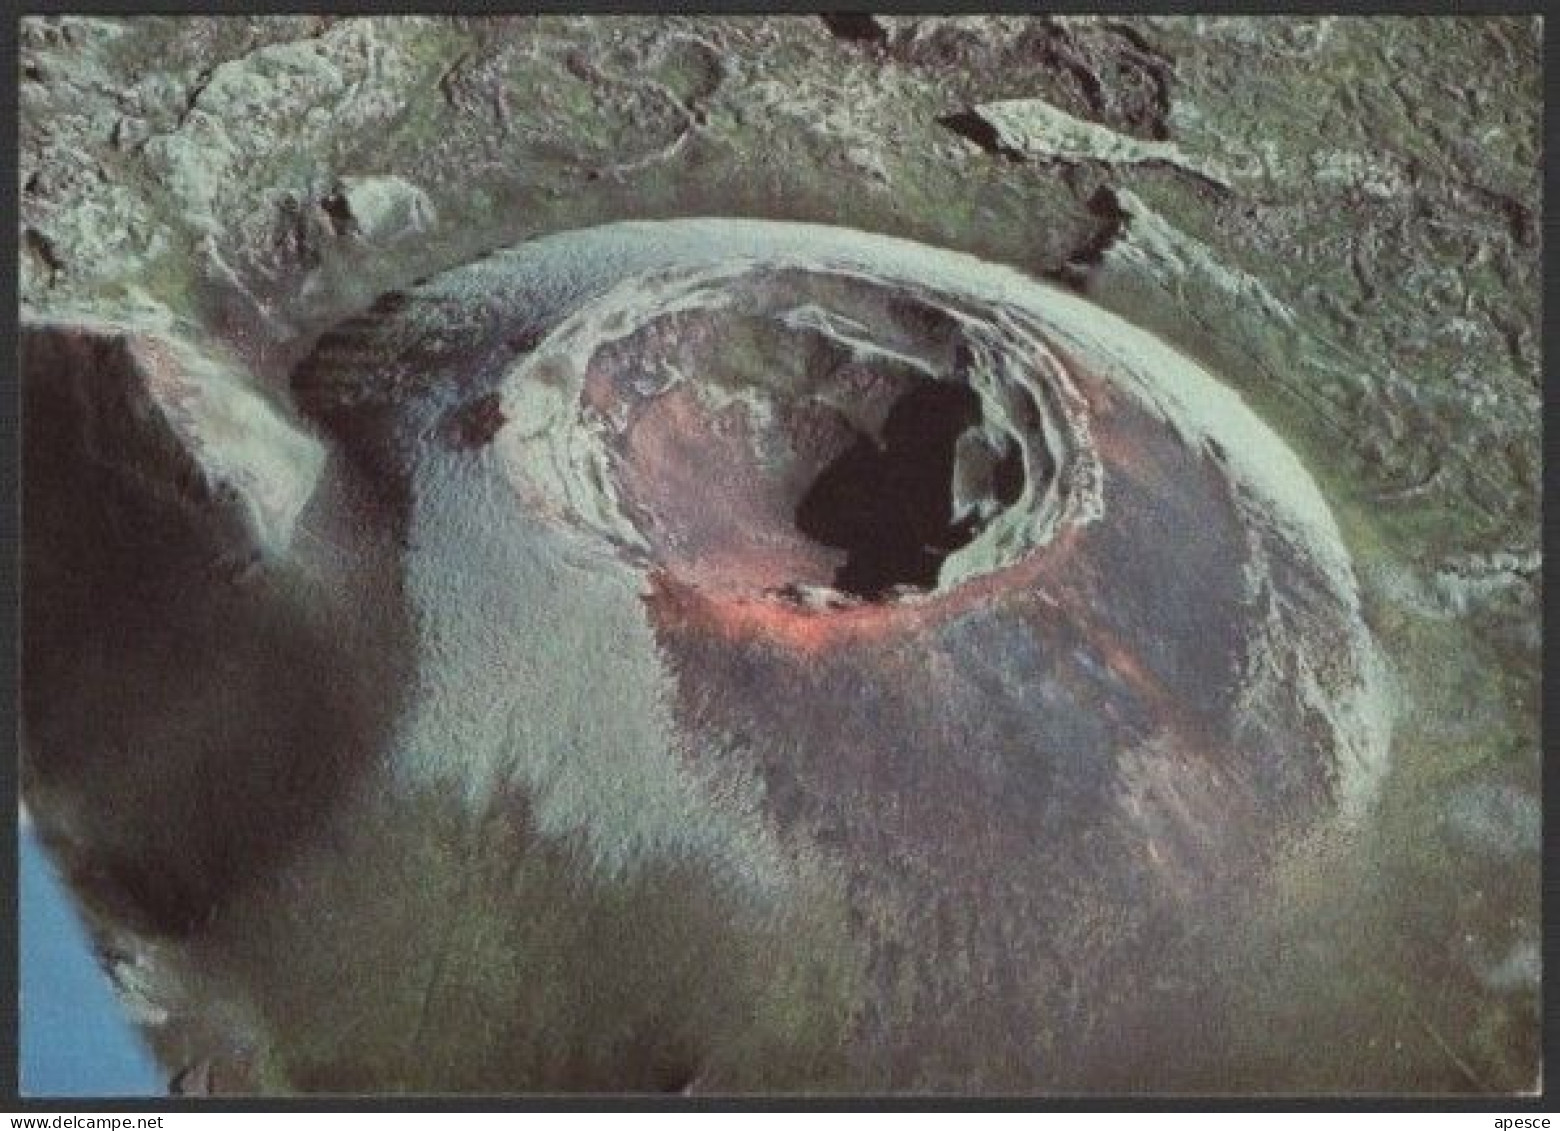 ICELAND - ONE OF THE 115 CRATERS OF THE INFAMOUS LAKI FISSURE ERUPTION 1783 - MINT - I - Island